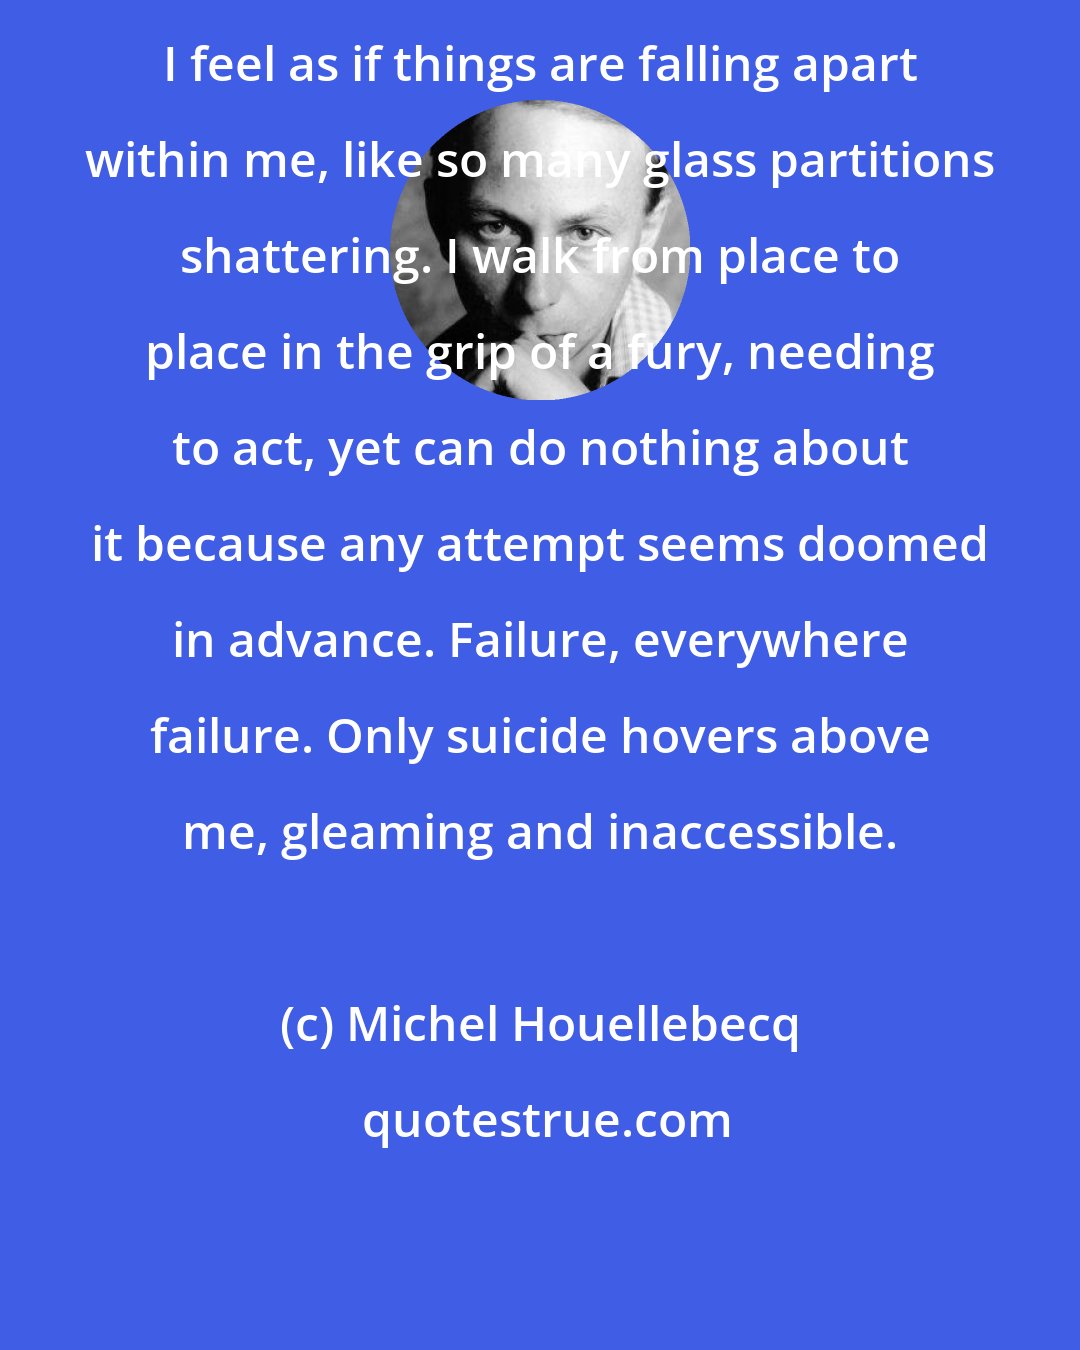 Michel Houellebecq: I feel as if things are falling apart within me, like so many glass partitions shattering. I walk from place to place in the grip of a fury, needing to act, yet can do nothing about it because any attempt seems doomed in advance. Failure, everywhere failure. Only suicide hovers above me, gleaming and inaccessible.